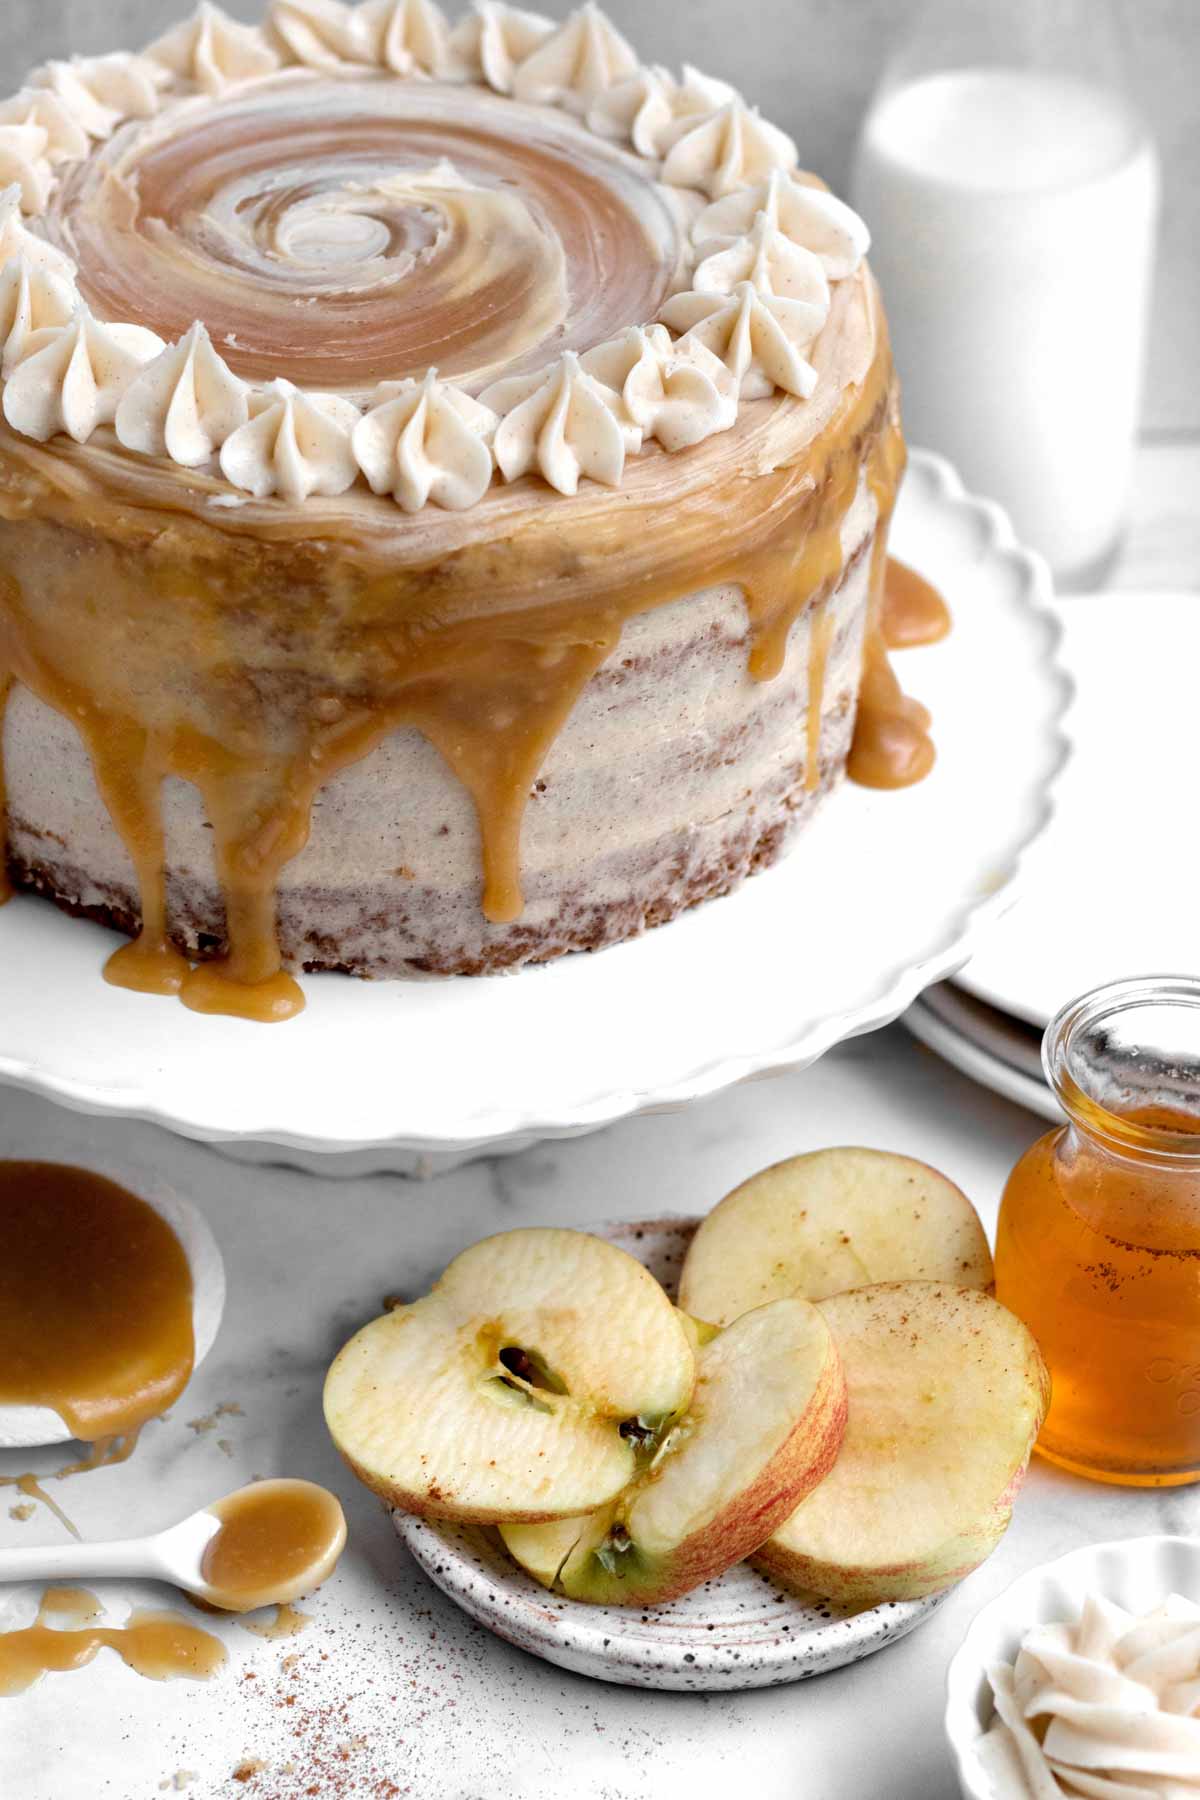 The cake sits dripping with an apple cider caramel swirl.